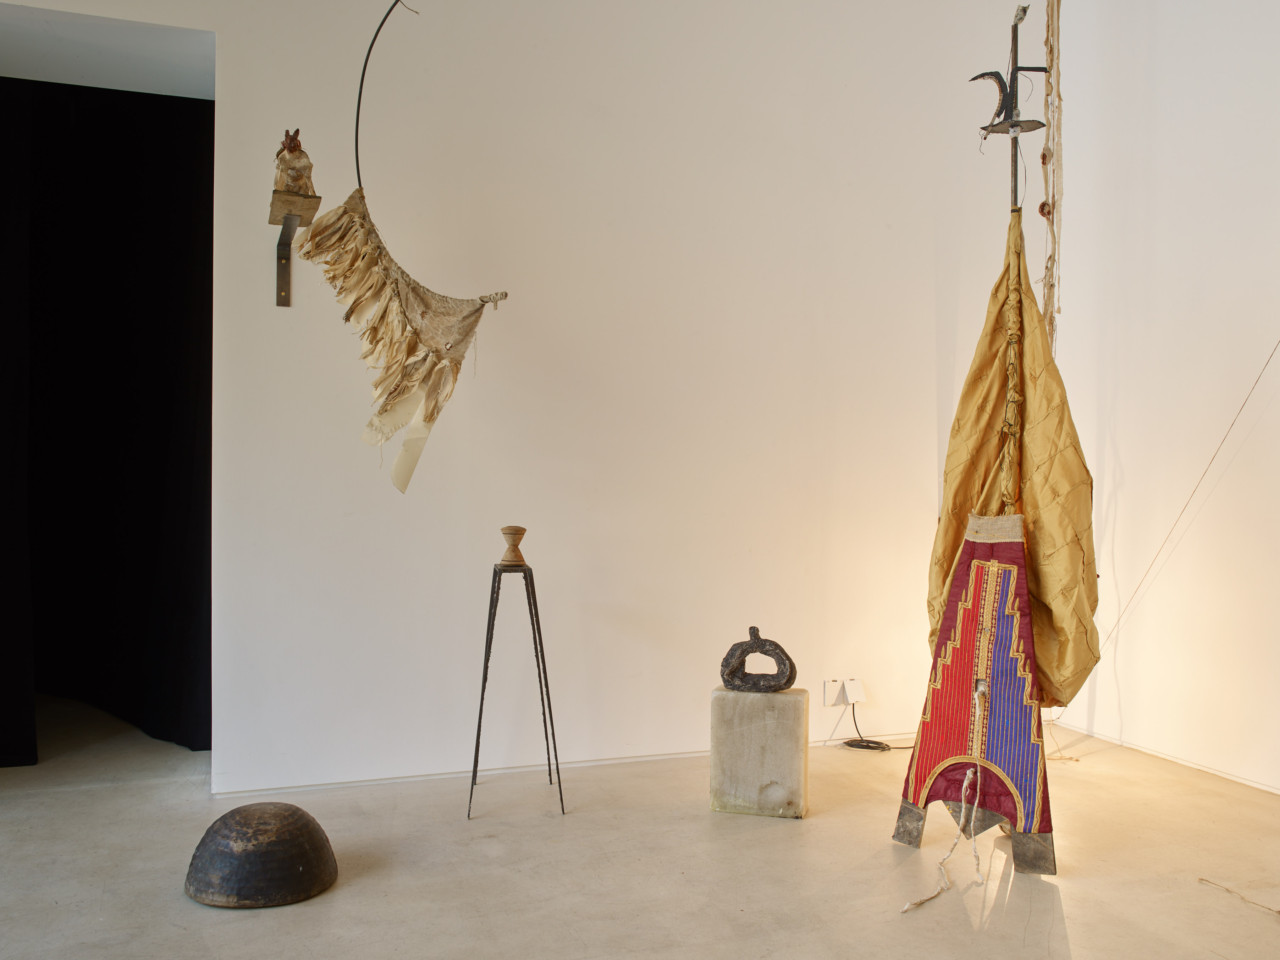 Fourthland with Rosalind Fowler, BREADROCK, installation view at PEER, Hoxton. Works by artists and objects belonging to Wenlock Barn residents. Photo by Stephen White